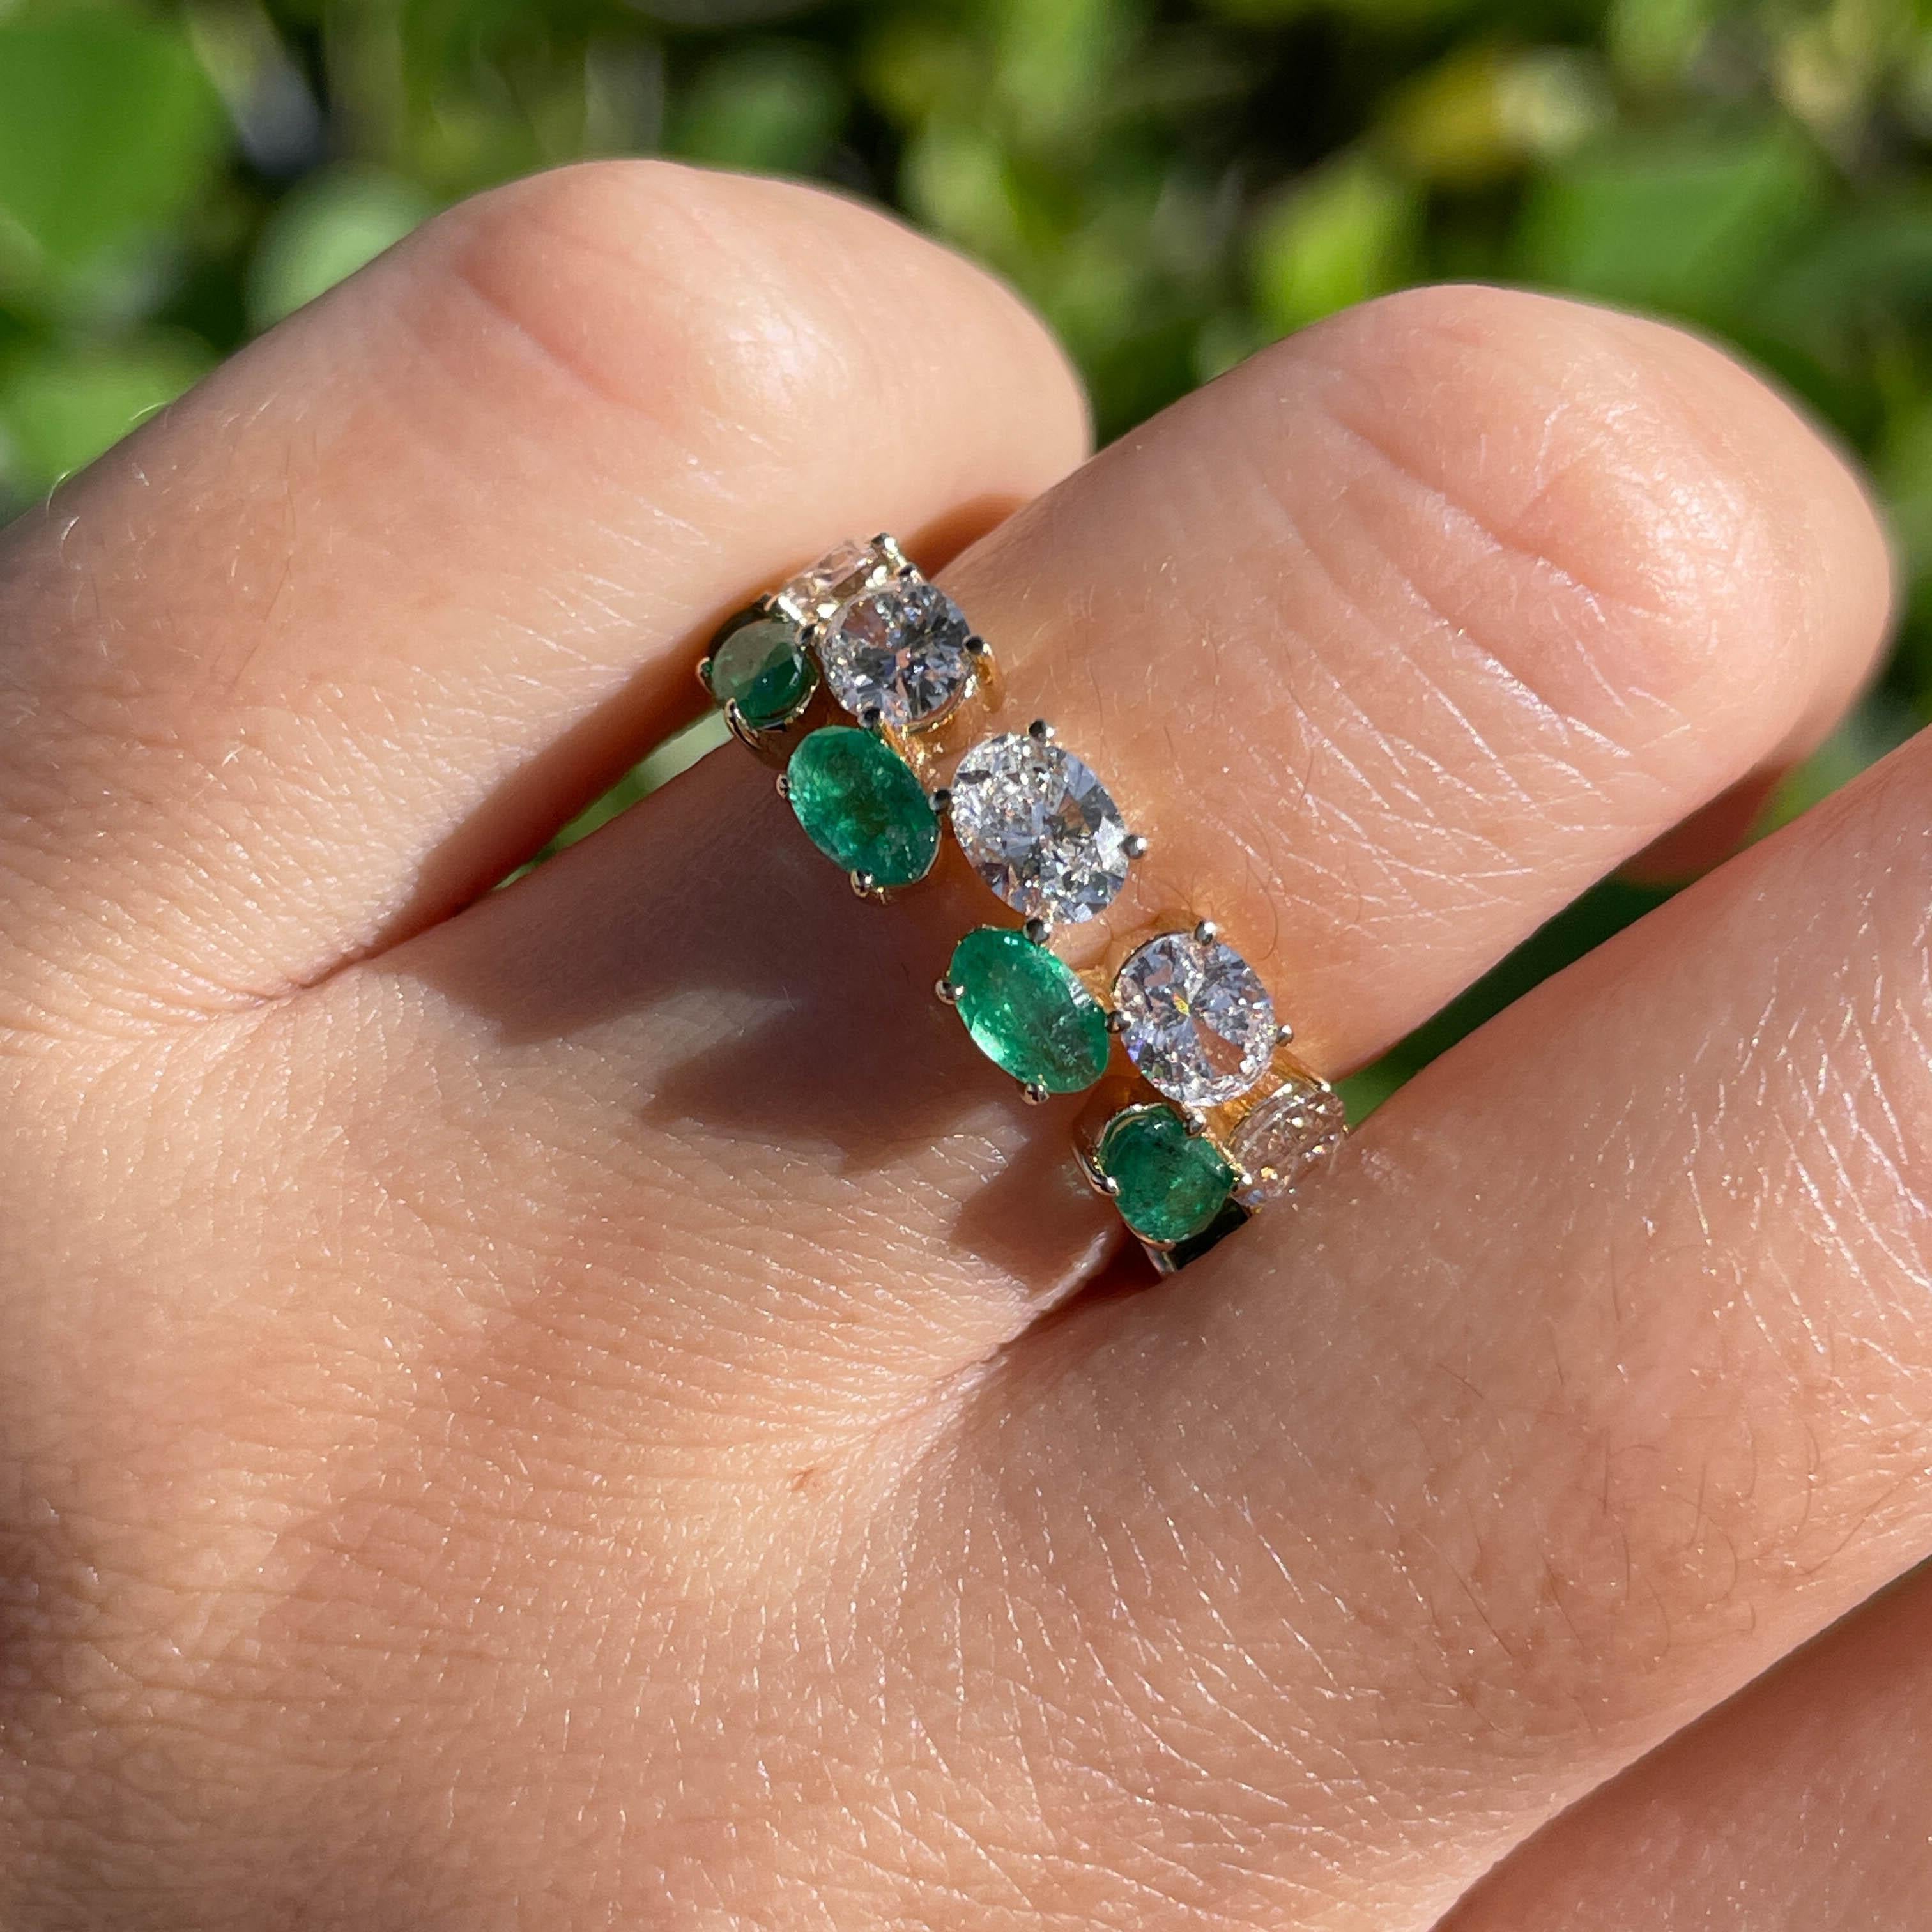 Jay Feder 14k Yellow Gold Emerald and Diamond Band Ring

Set with 2.0ct Oval Green Emeralds and 1.55ct Oval Diamonds. 

The ring is 6.40mm wide; sits 3.24mm from the top of the finger. Ring size is 6 (not-sizable). Total weight is 3.8 grams.